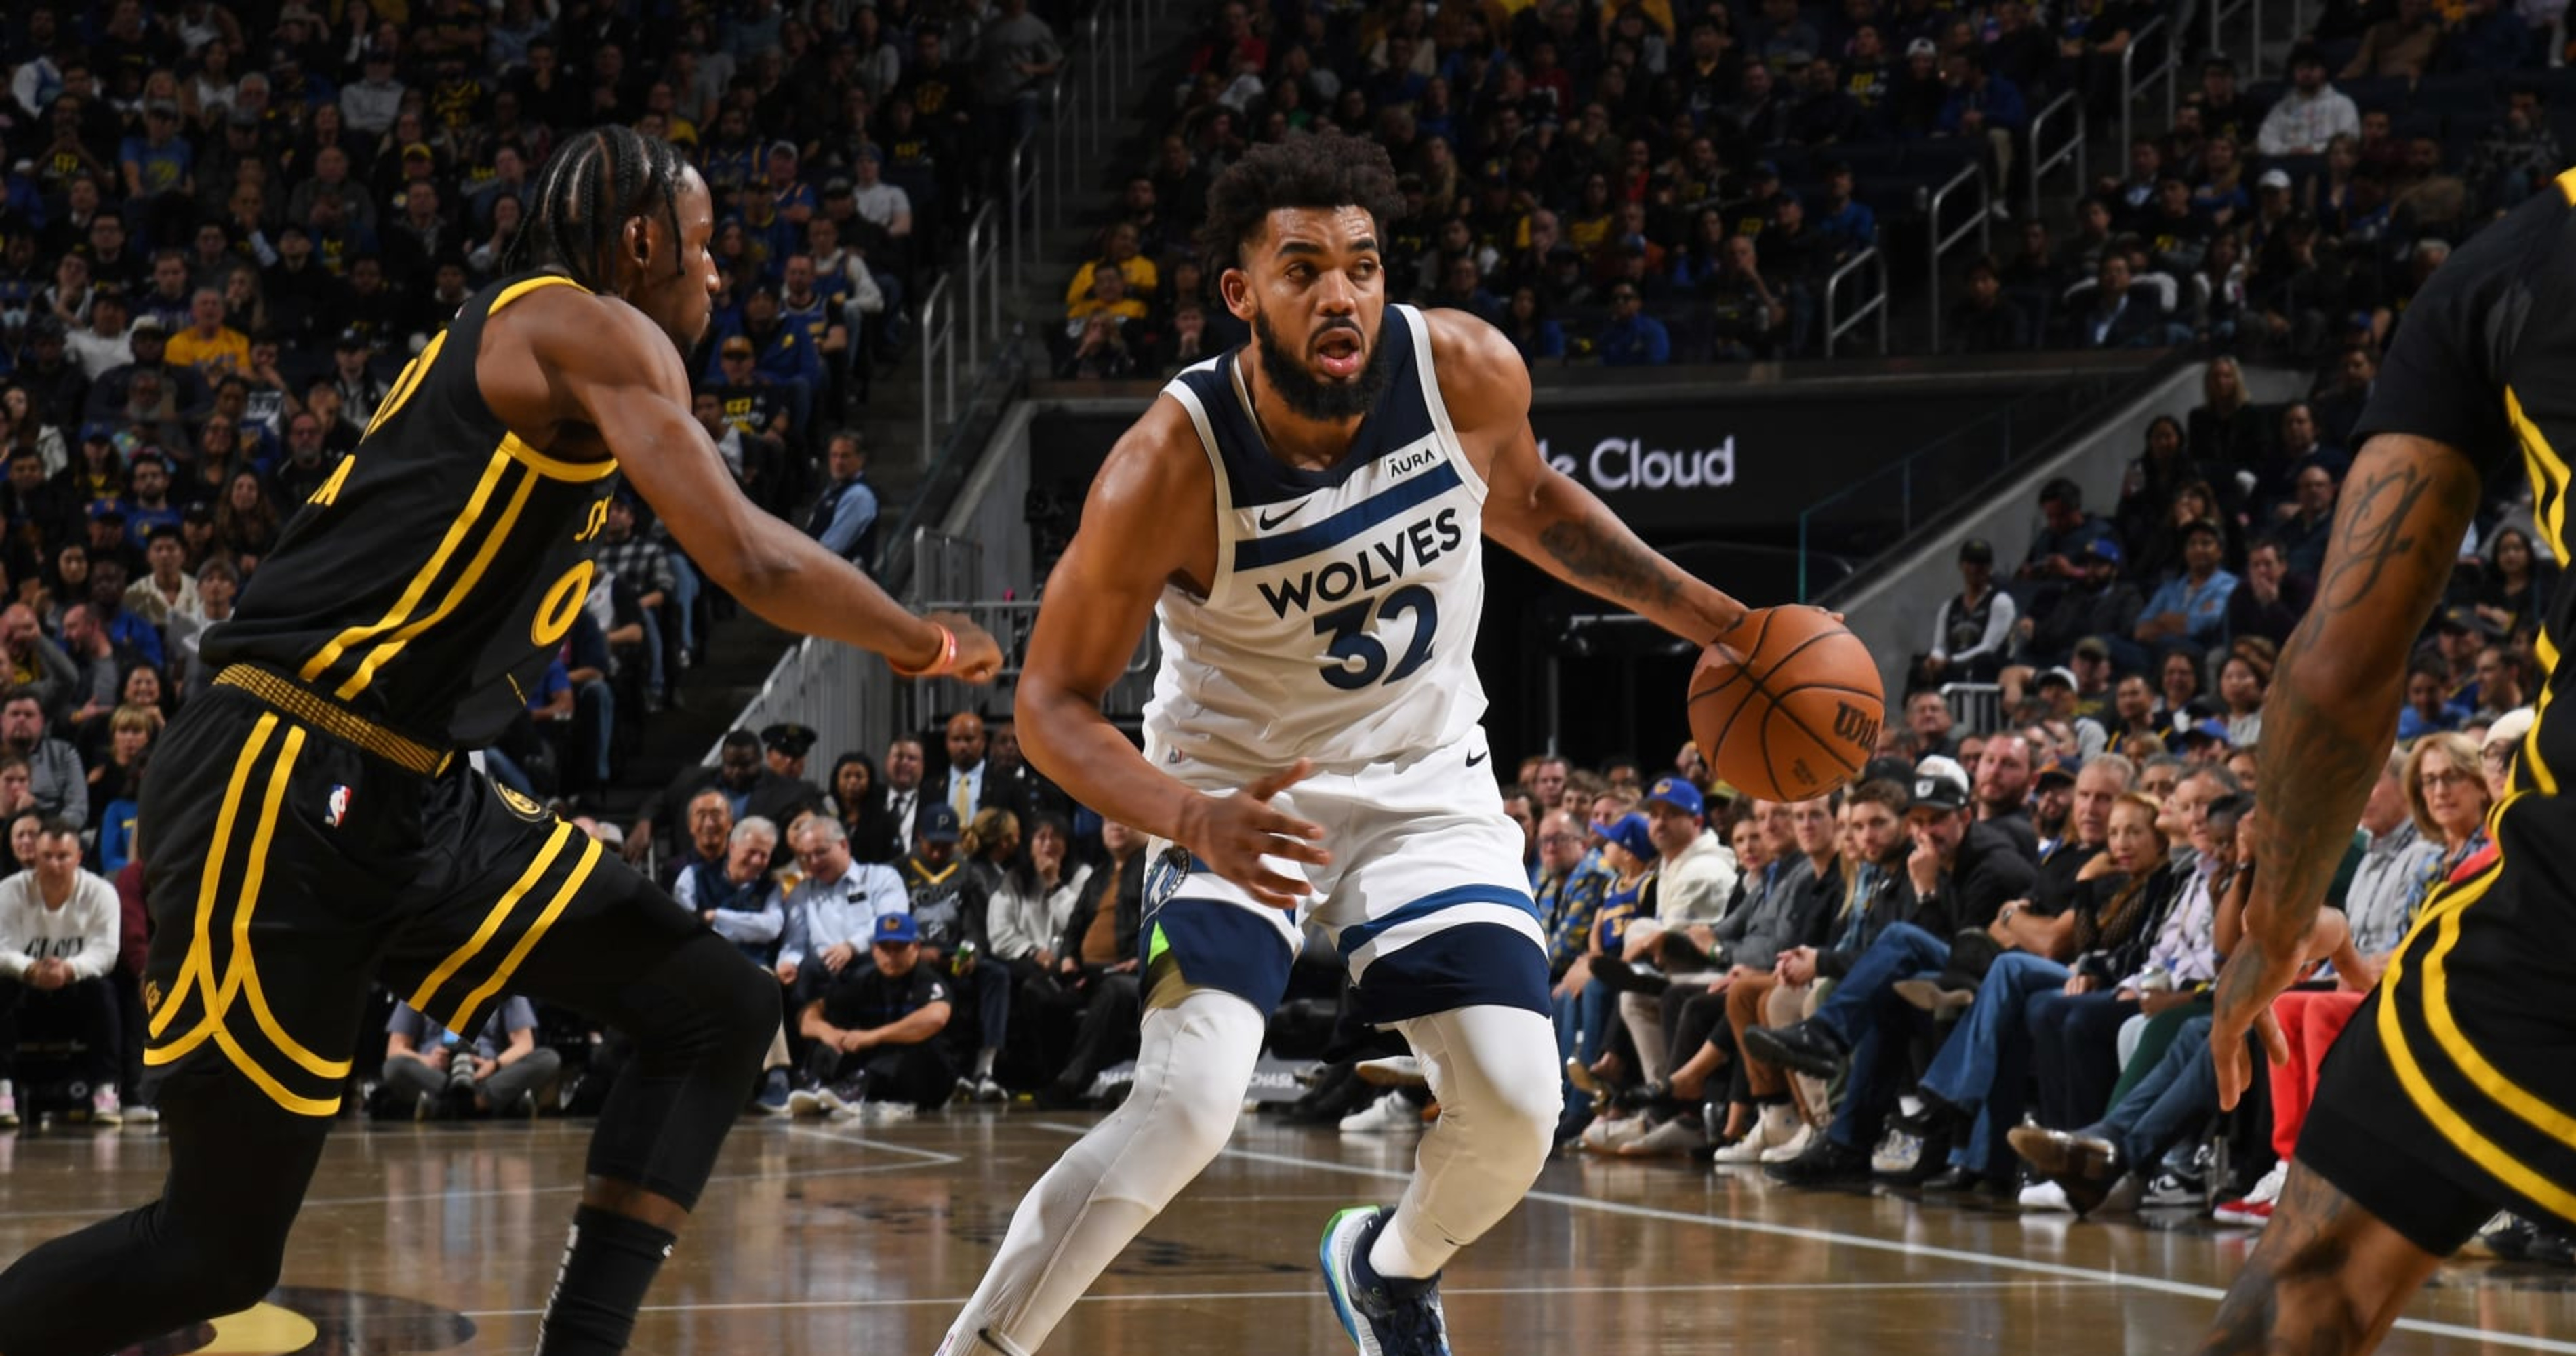 Nba Trade Rumors Karl Anthony Towns Availability Is Overblown Amid